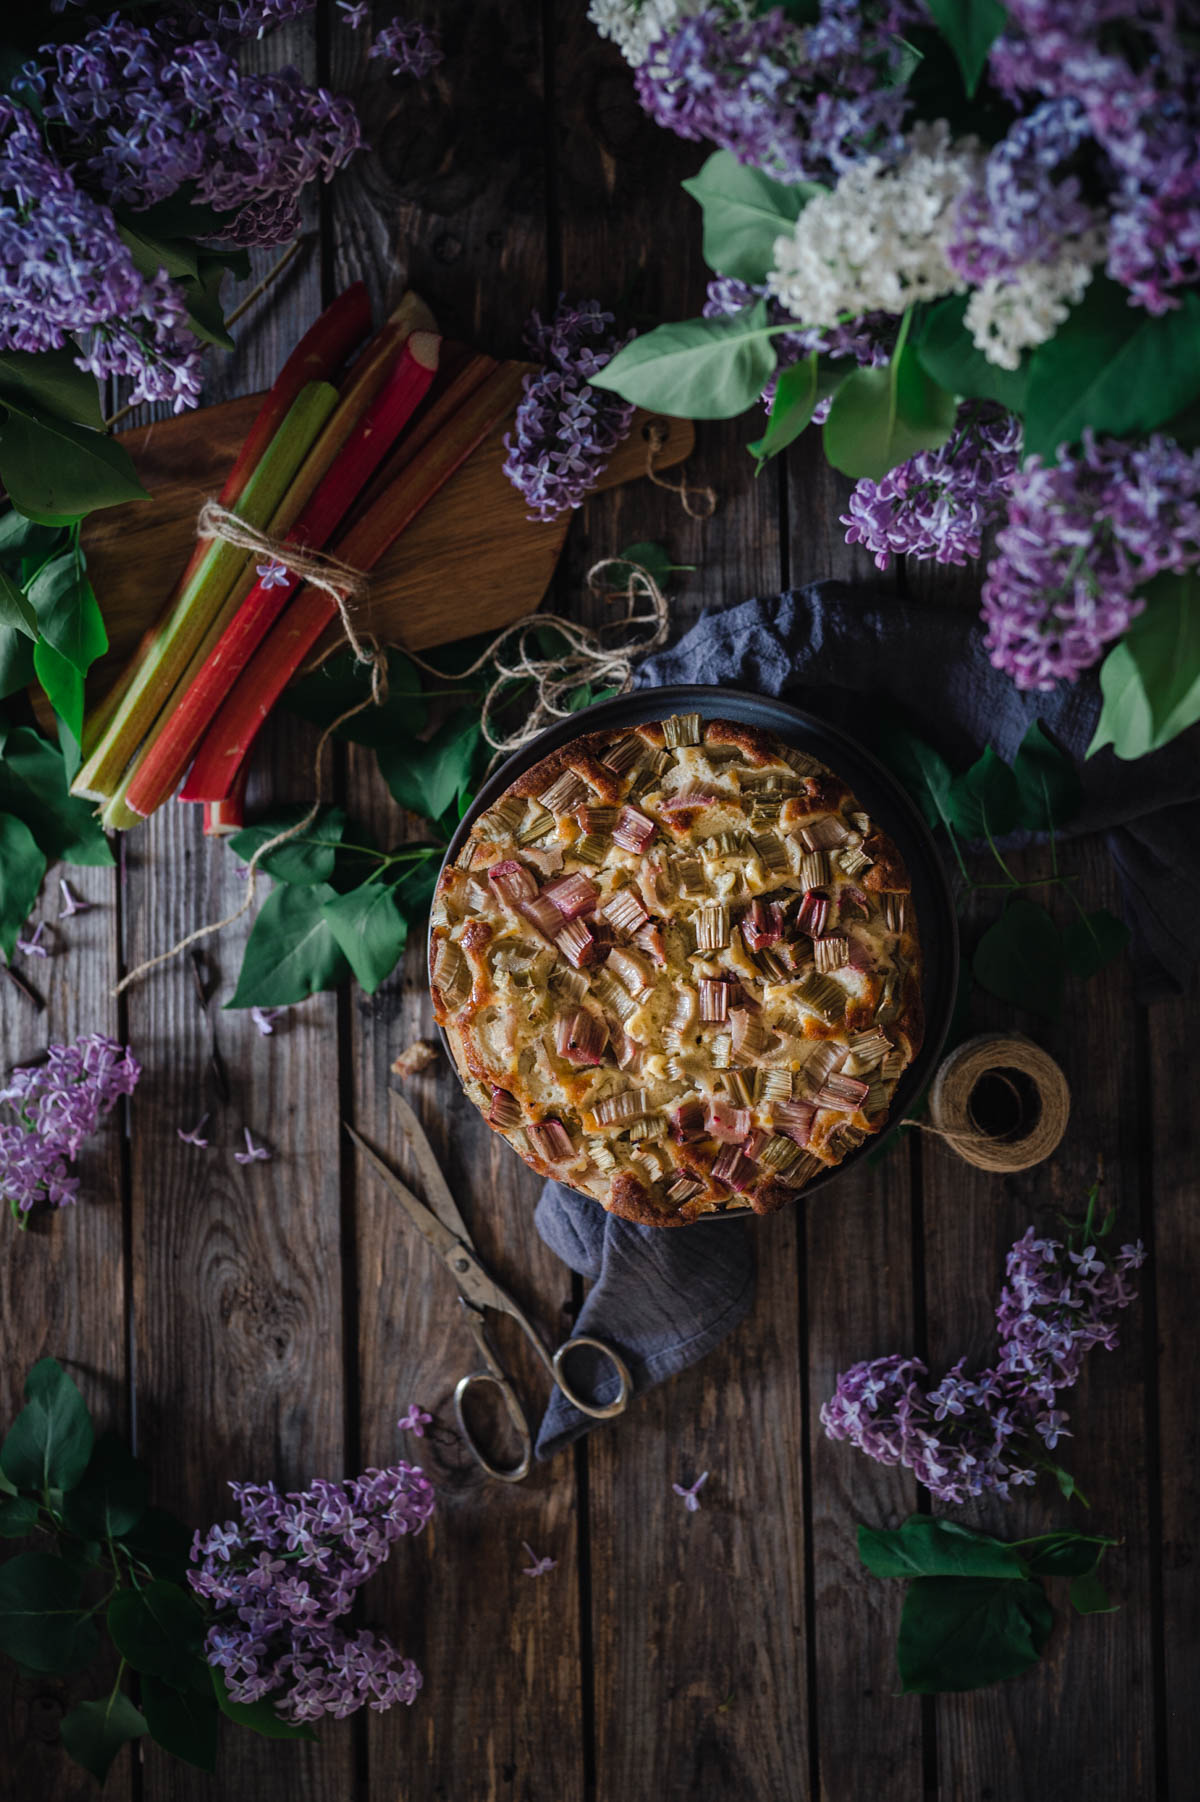 A flatlay of a rhubarb and ricotta cake on a wooden board. Lilacs and fresh rhubarb stalks.